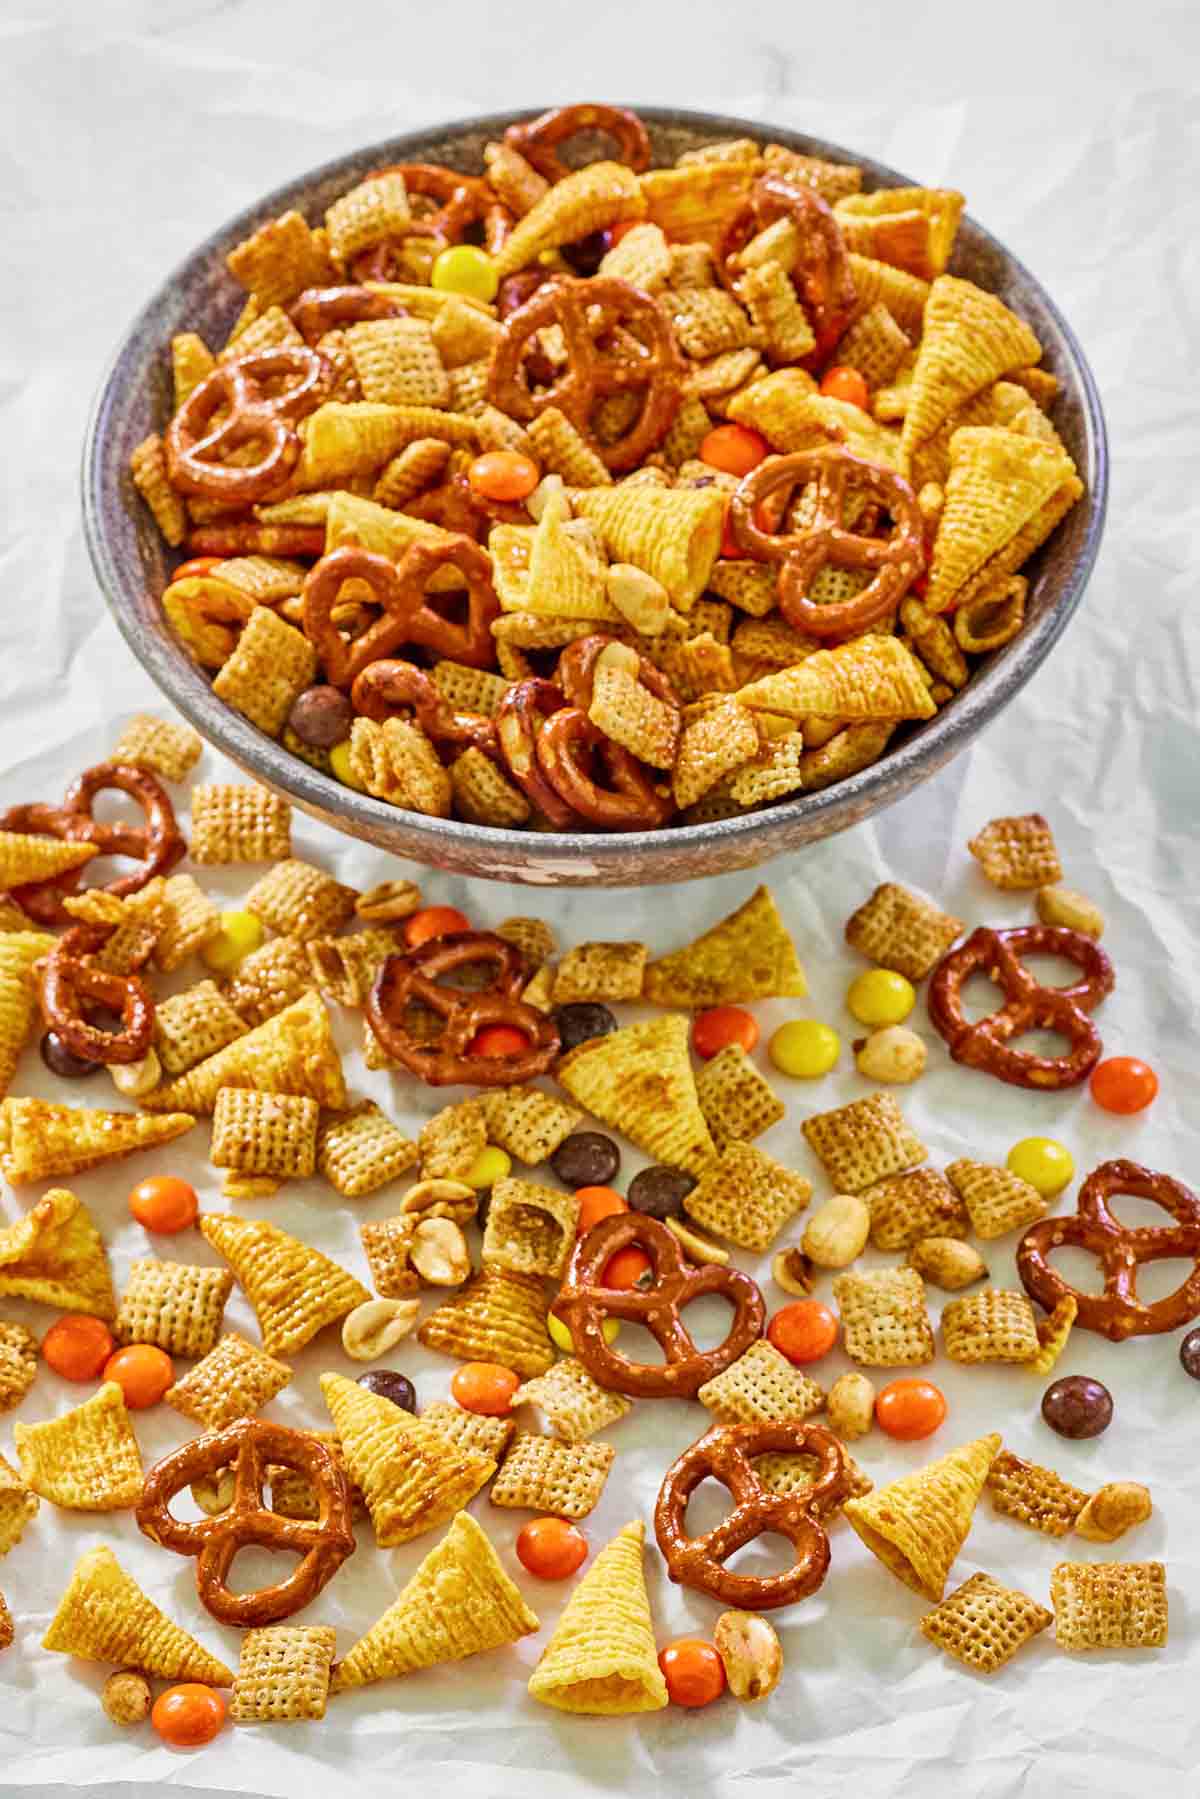 Sweet and salty Chex mix in a bowl and on parchment paper in front of the bowl.